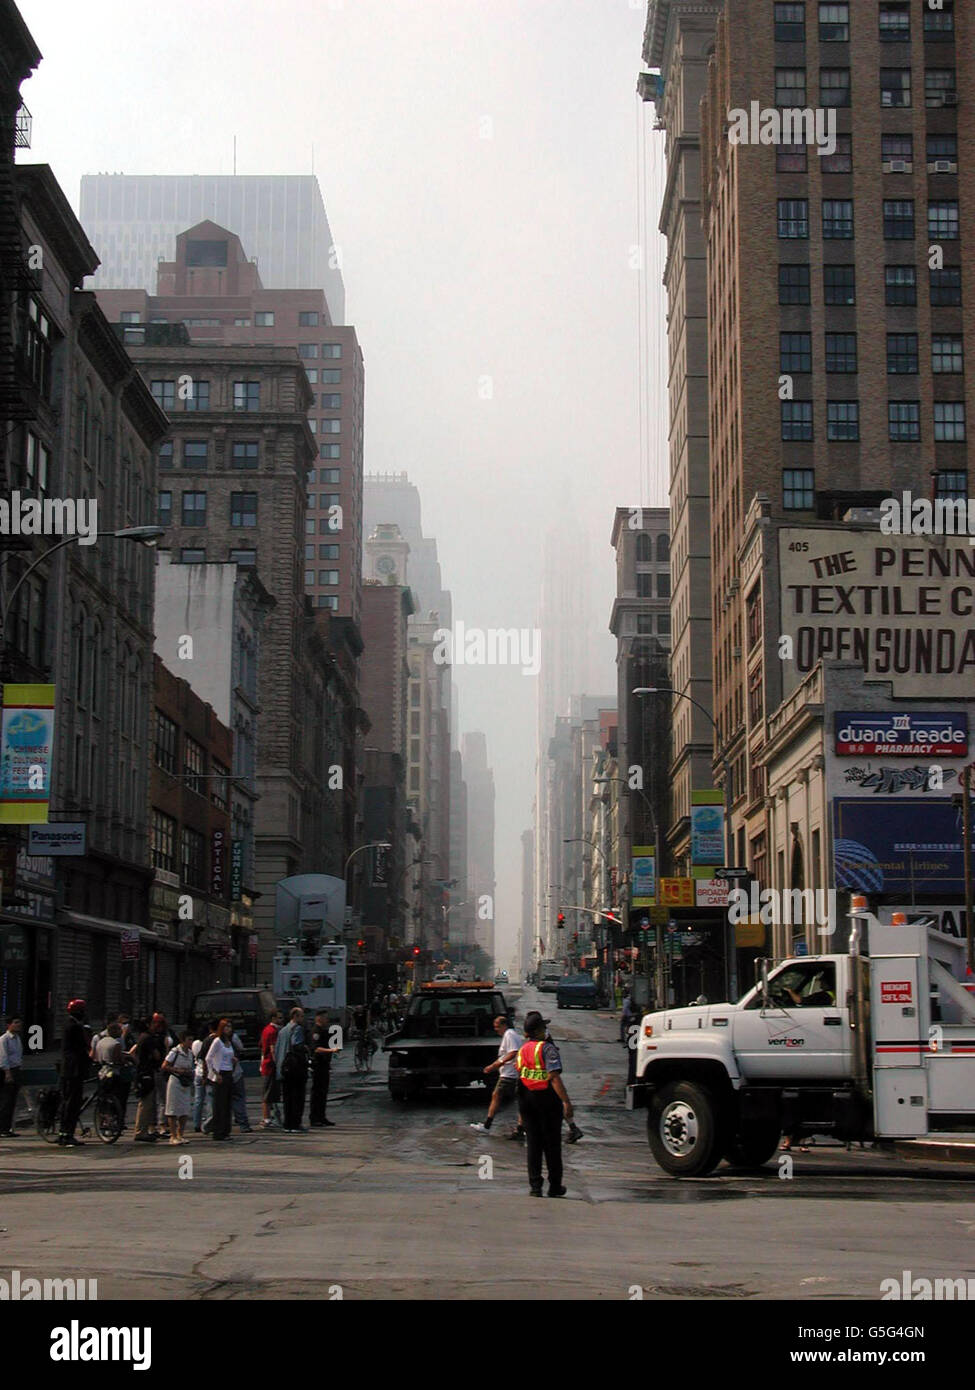 New York covered in a cloud of dust limiting visibility and raising fears of asbestos contamination. Stock Photo